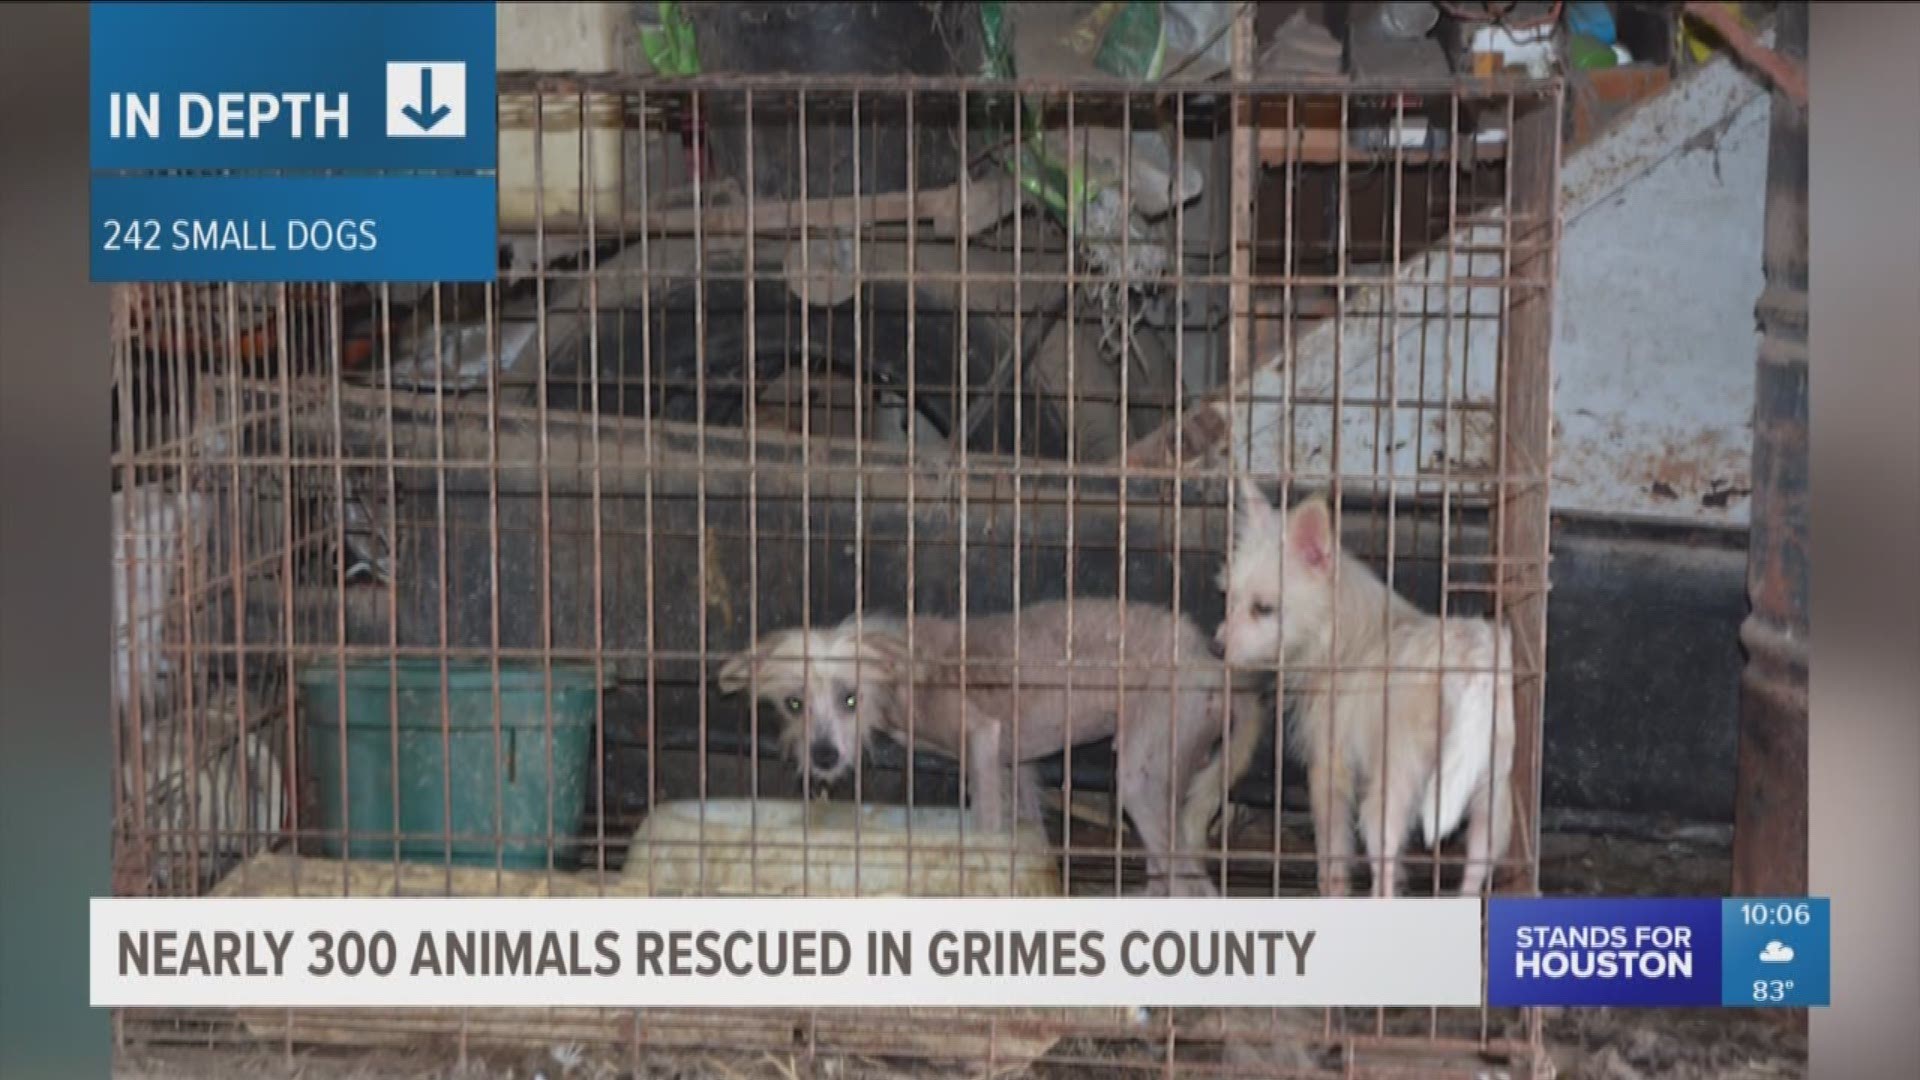 Nearly 300 animals are being cared for after they were rescued from deplorable conditions at a home in Grimes County.